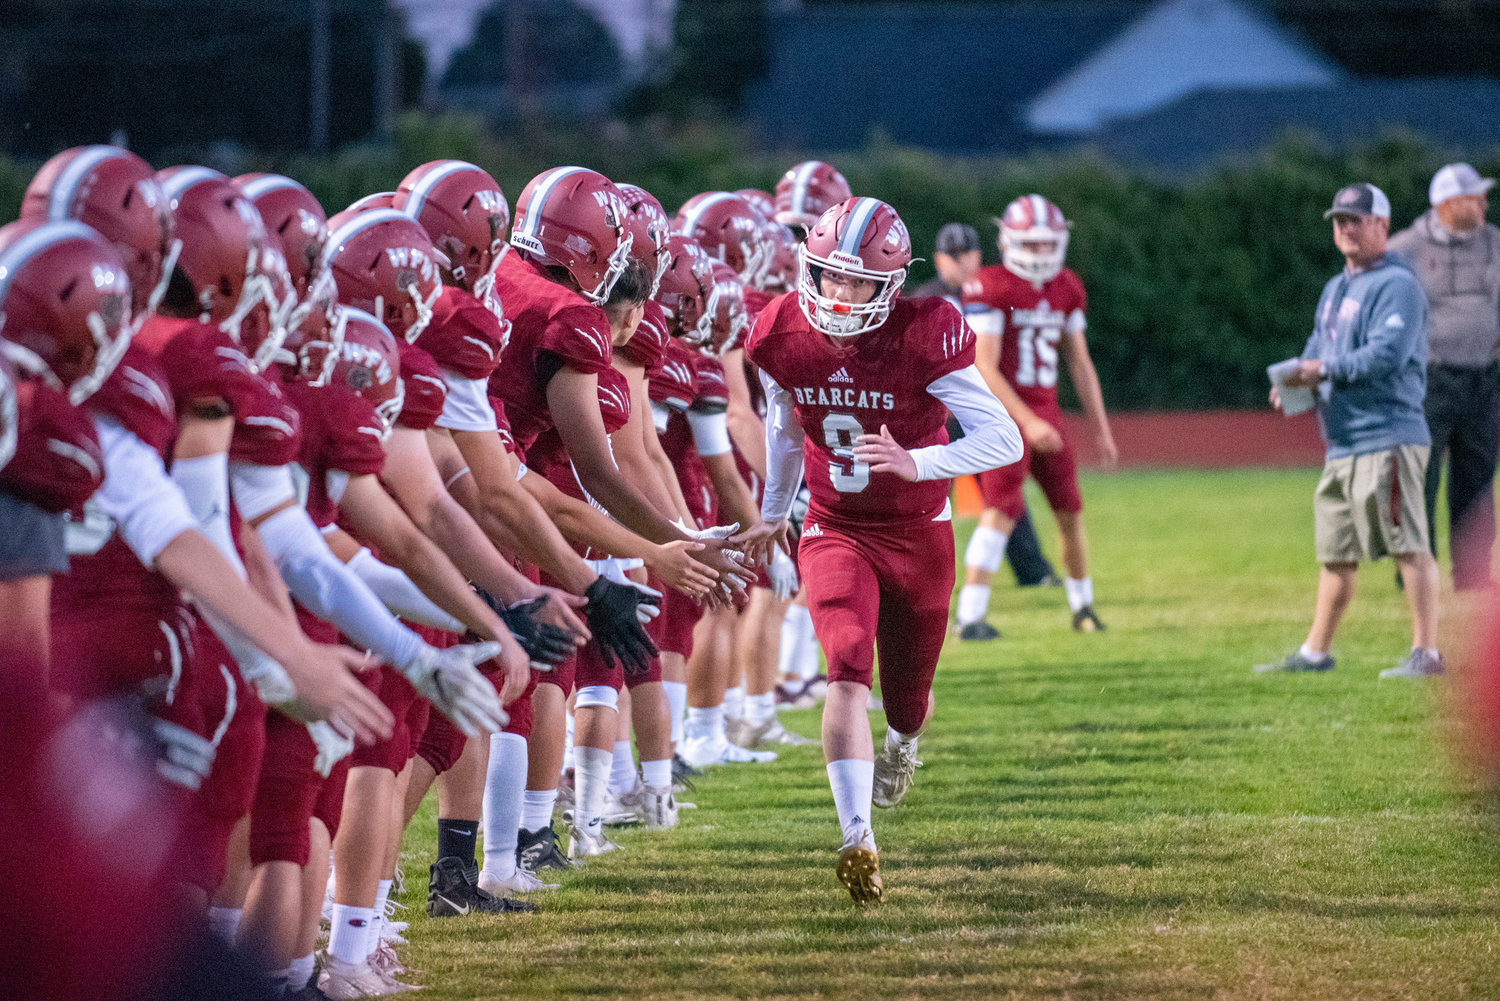 W.F. West quarterback Gavin Fugate (9) sprints down the sideline during pregame announcements during a home game against Rochester on Oct. 8, 2021.